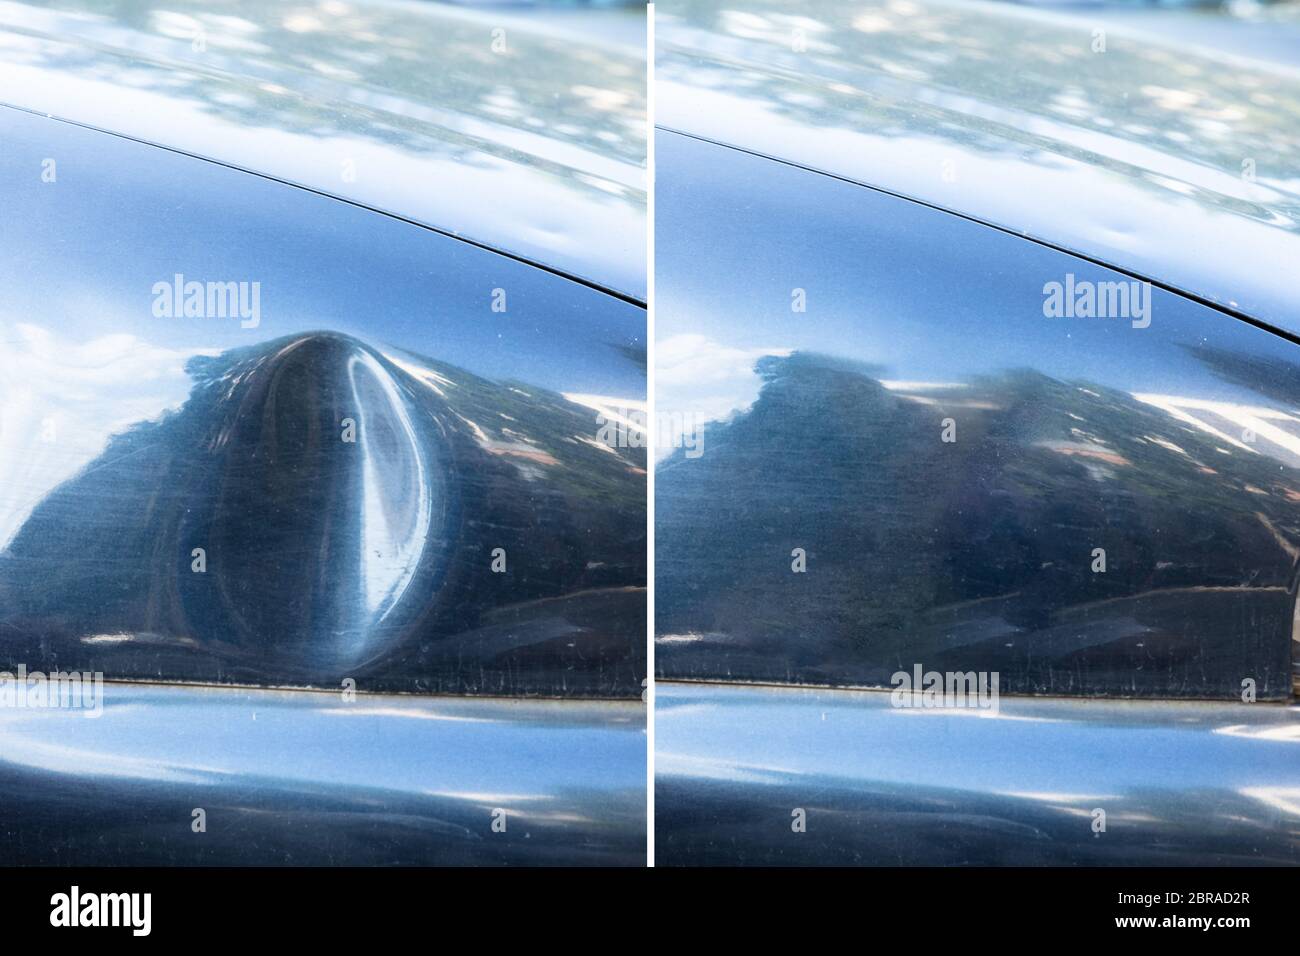 Photo of car dent repair before and after Stock Photo